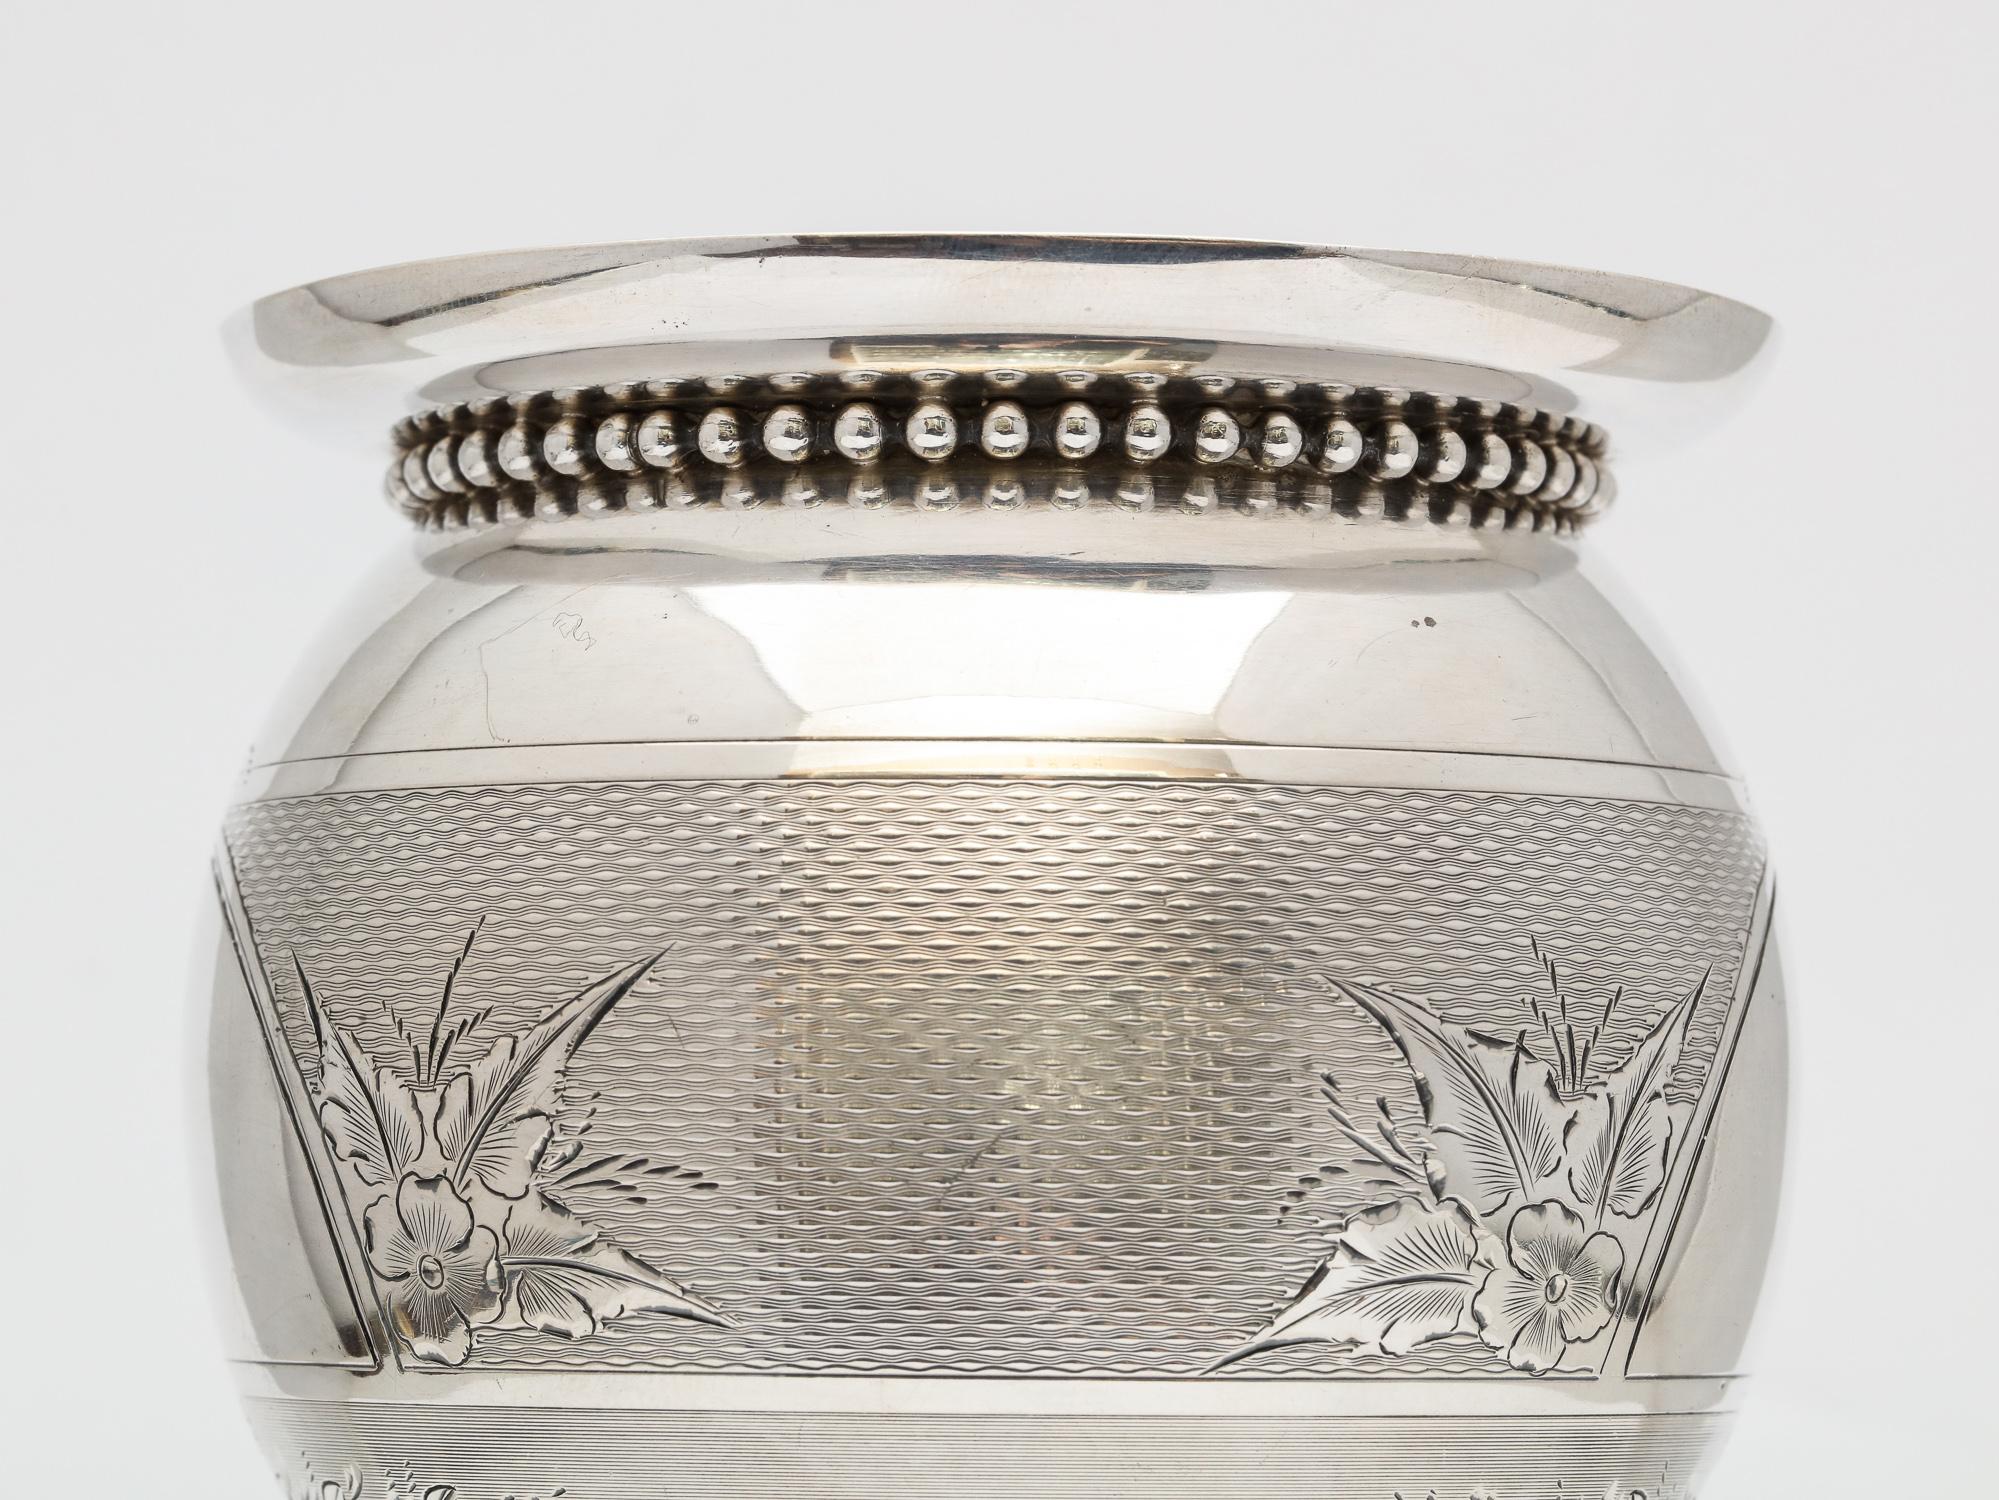 American, Neoclassical Coin Silver Vase by Gorham 11